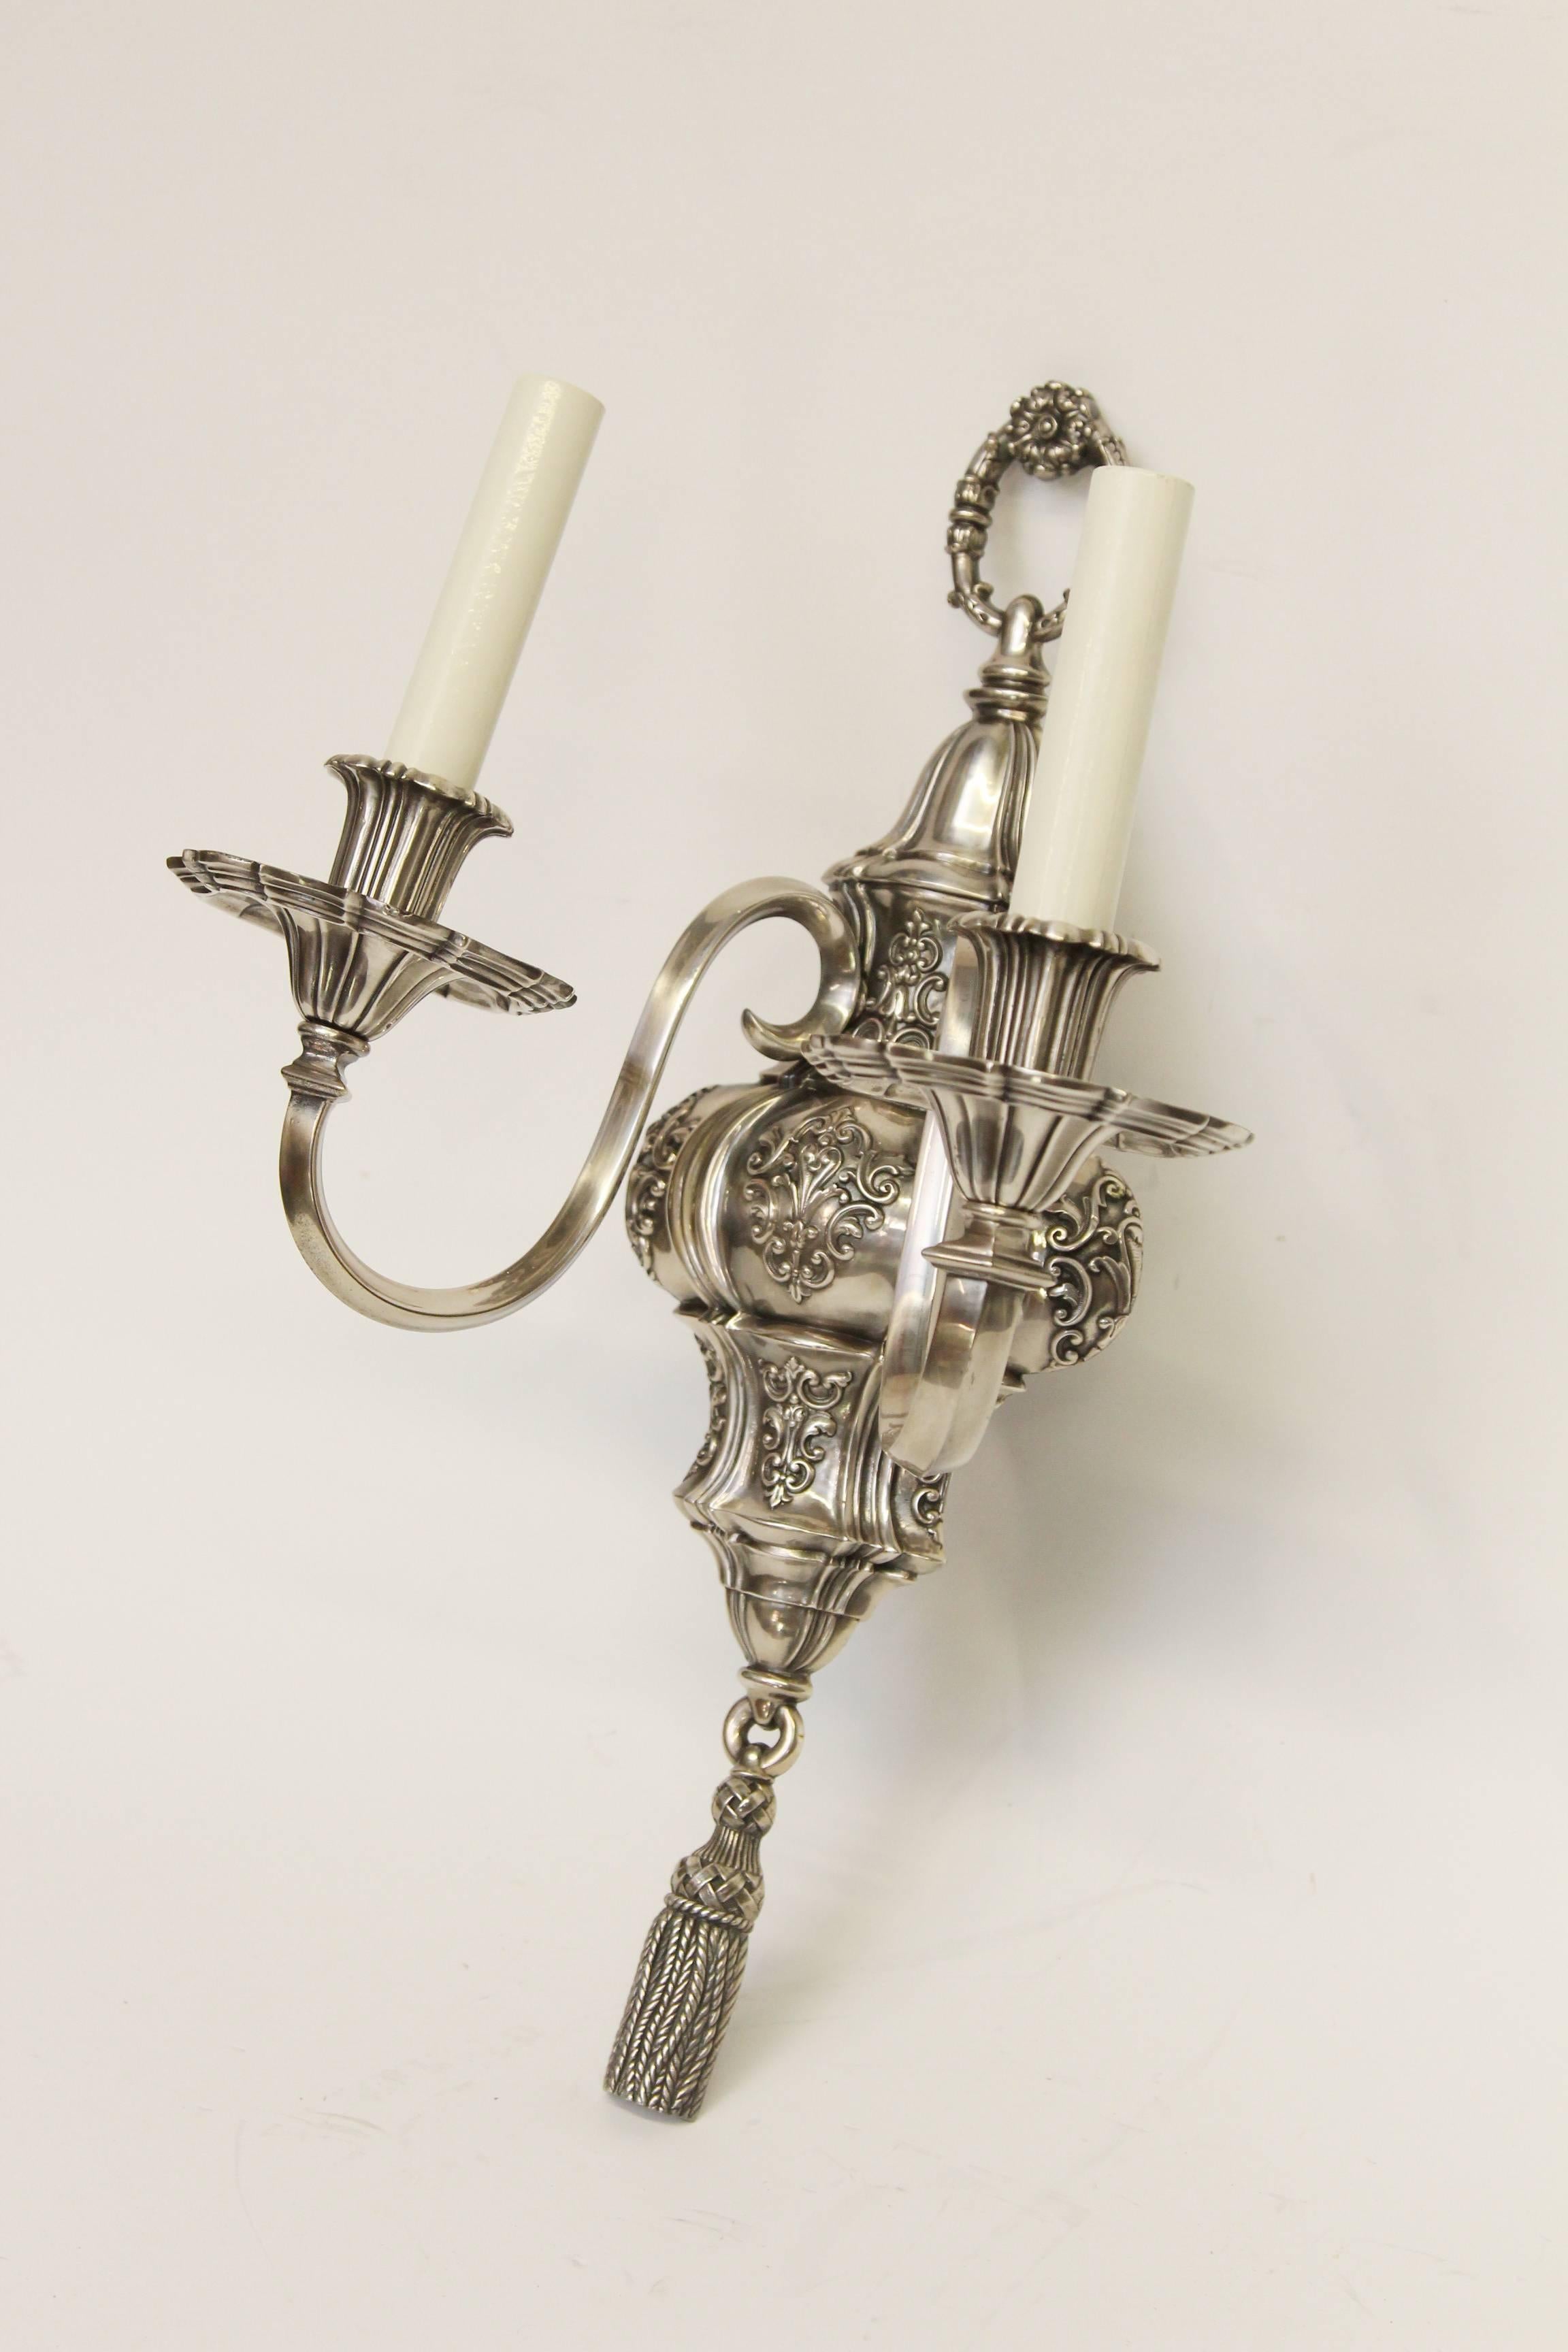 1920s pair of ornate Georgian EF Caldwell two-arm silver over bronze sconces. This can be viewed at one of our New York City locations. Please inquire for the exact address.